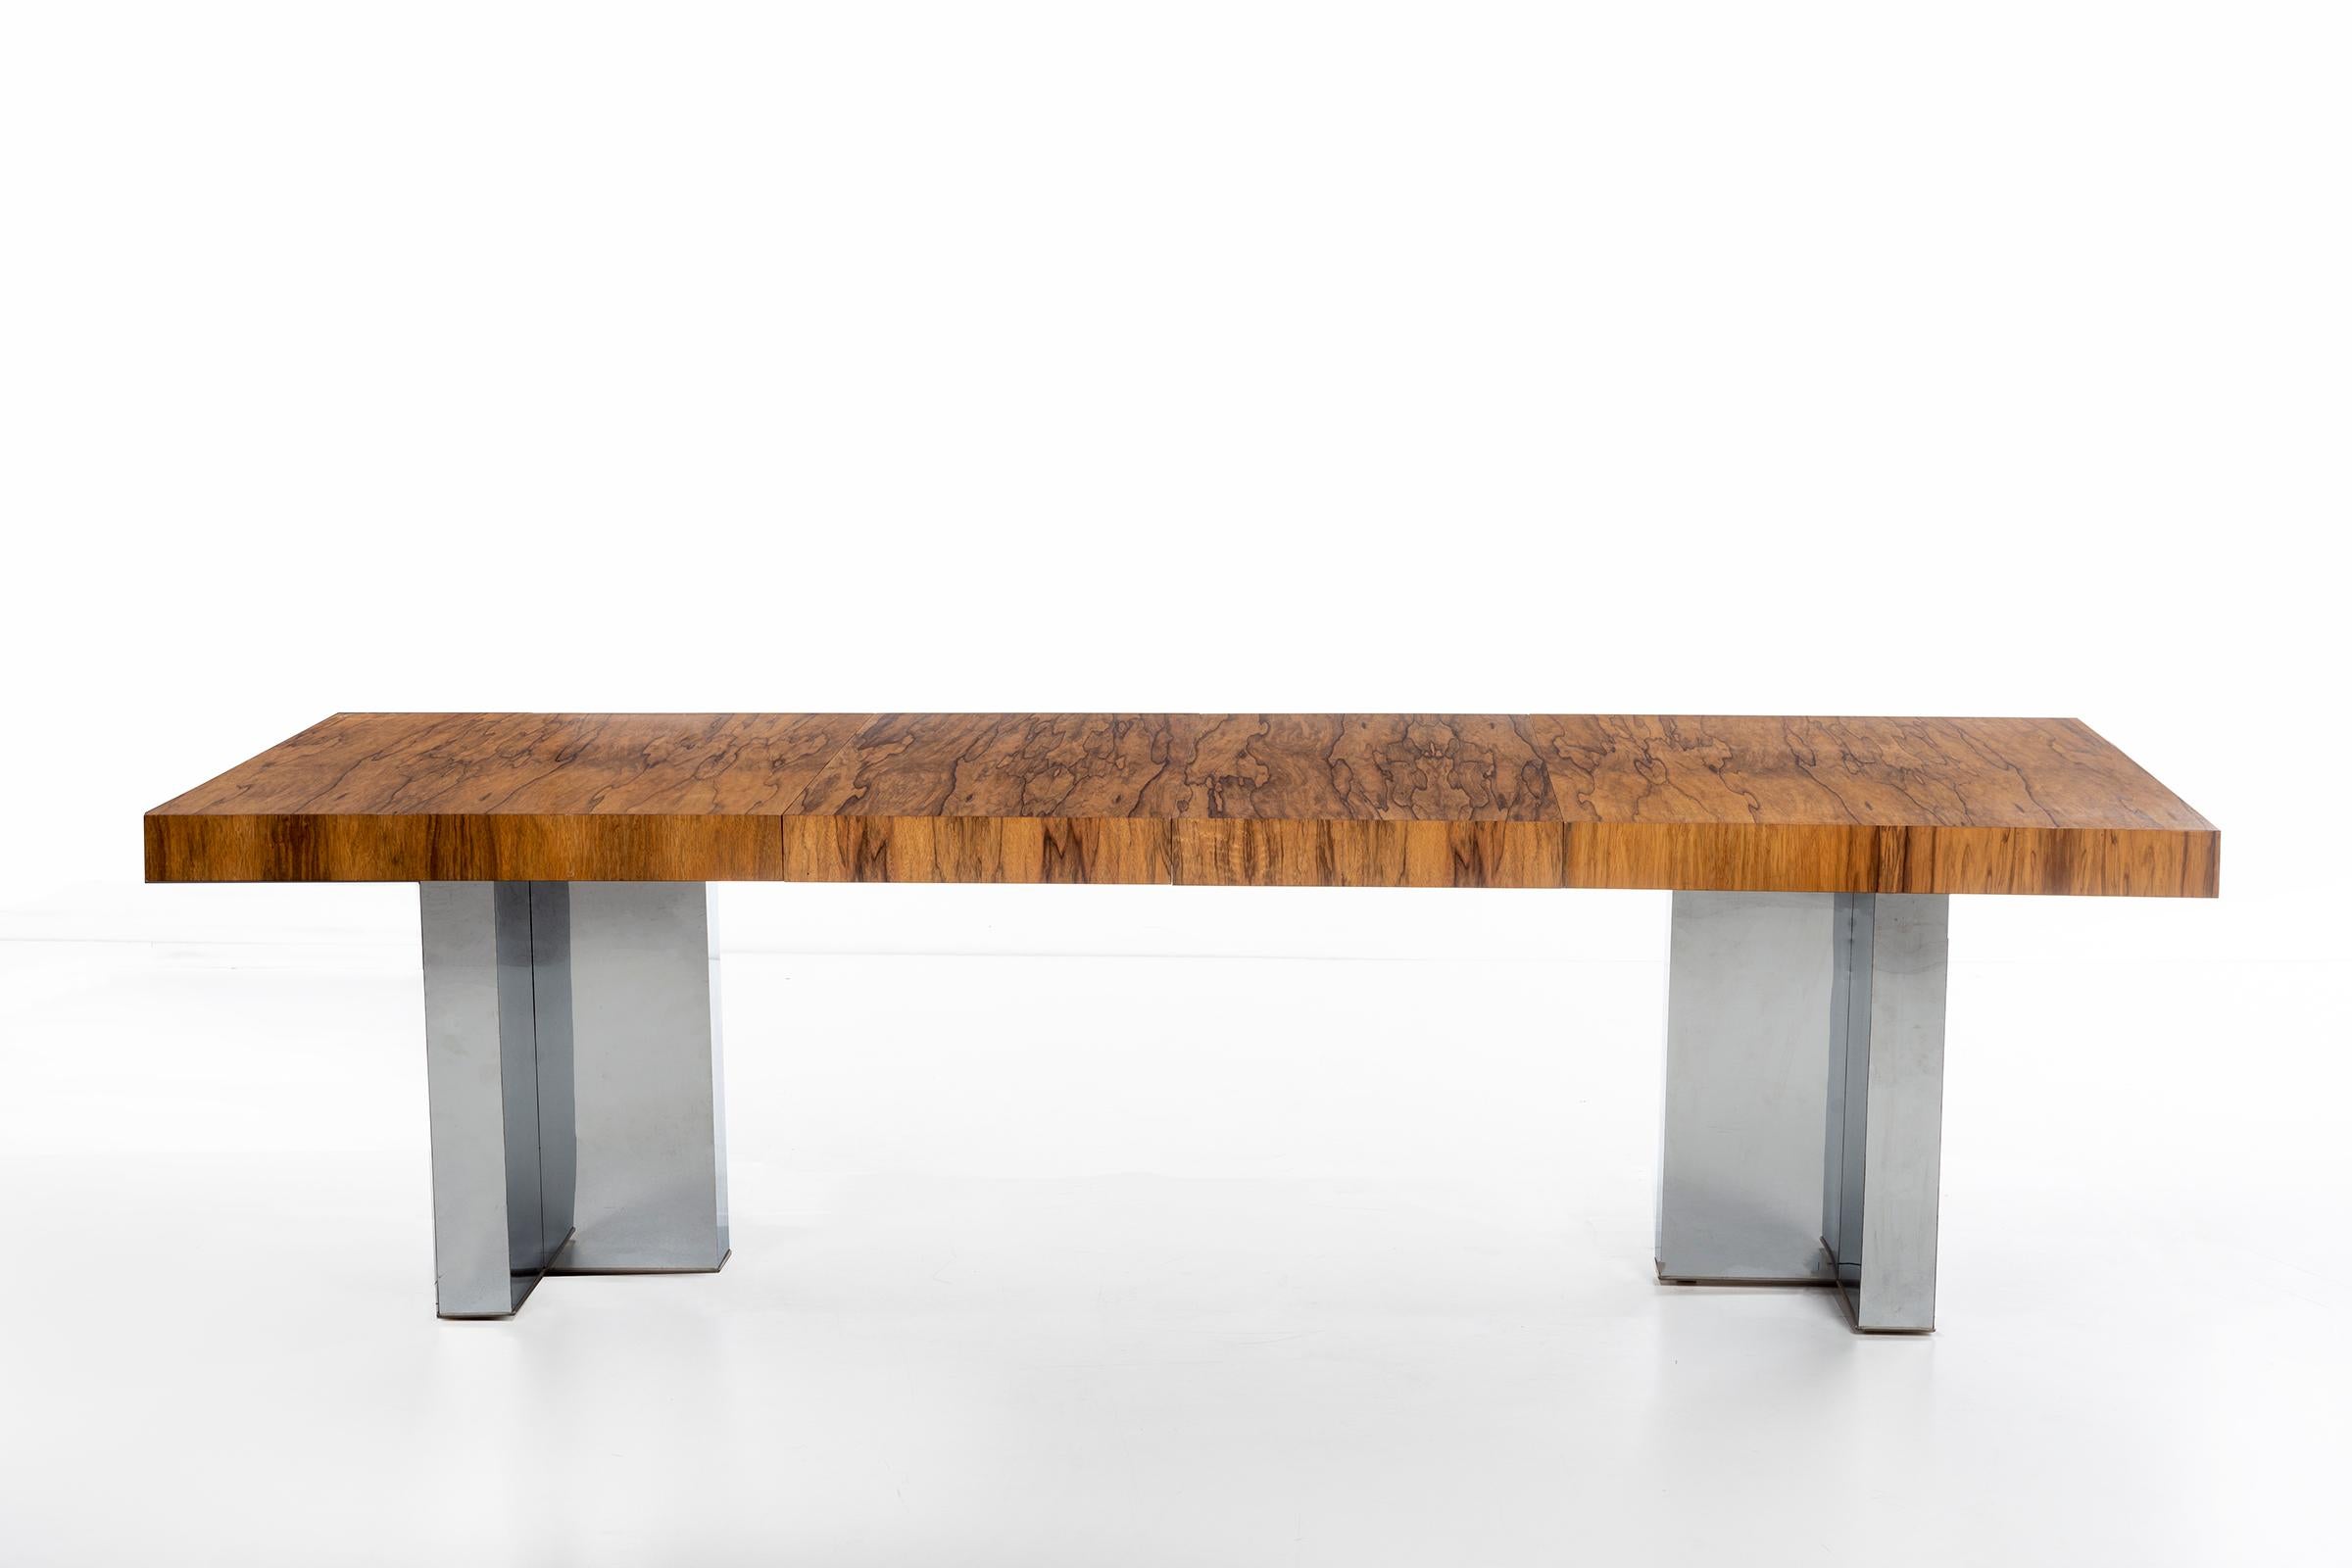 Milo Baughman for Thayer Coggin. Rosewood top with chrome legs. With two leaves the table extends to 98